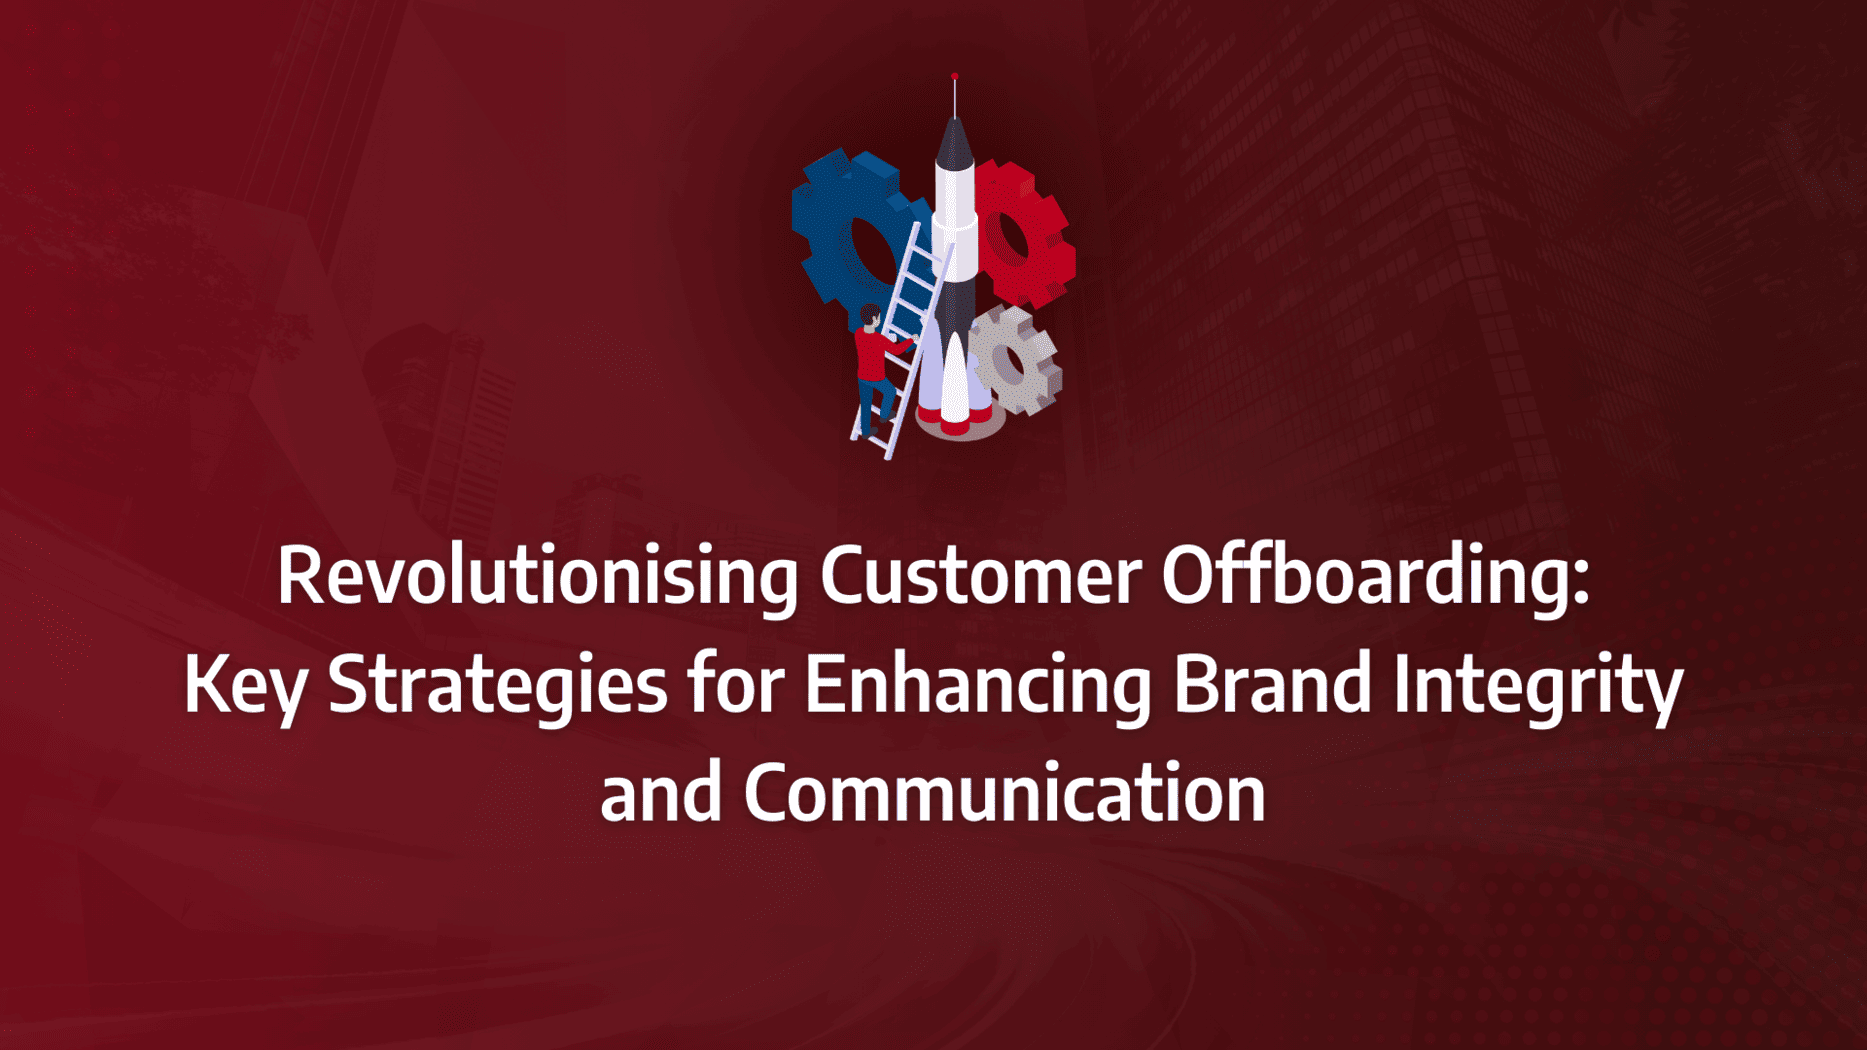 Customer offboarding: Enhancing brand integrity through structured offboarding processes, comprehensive offboarding checklists, strategic offboarding plans, and effective customer communication protocols: strategy framework diagram for customer offboarding process, customer offboarding checklist, customer offboarding plan, offboarding a customer